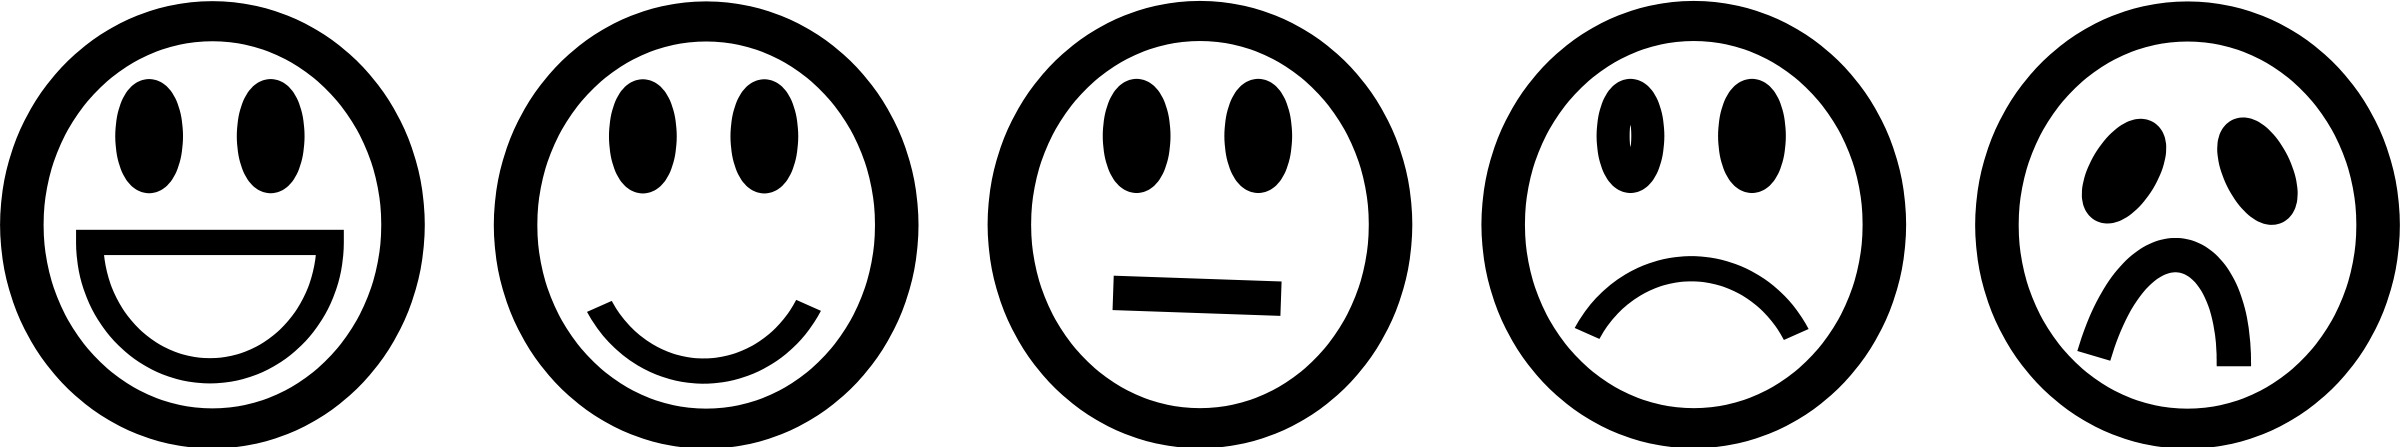 Clipart - Smileys Black and White